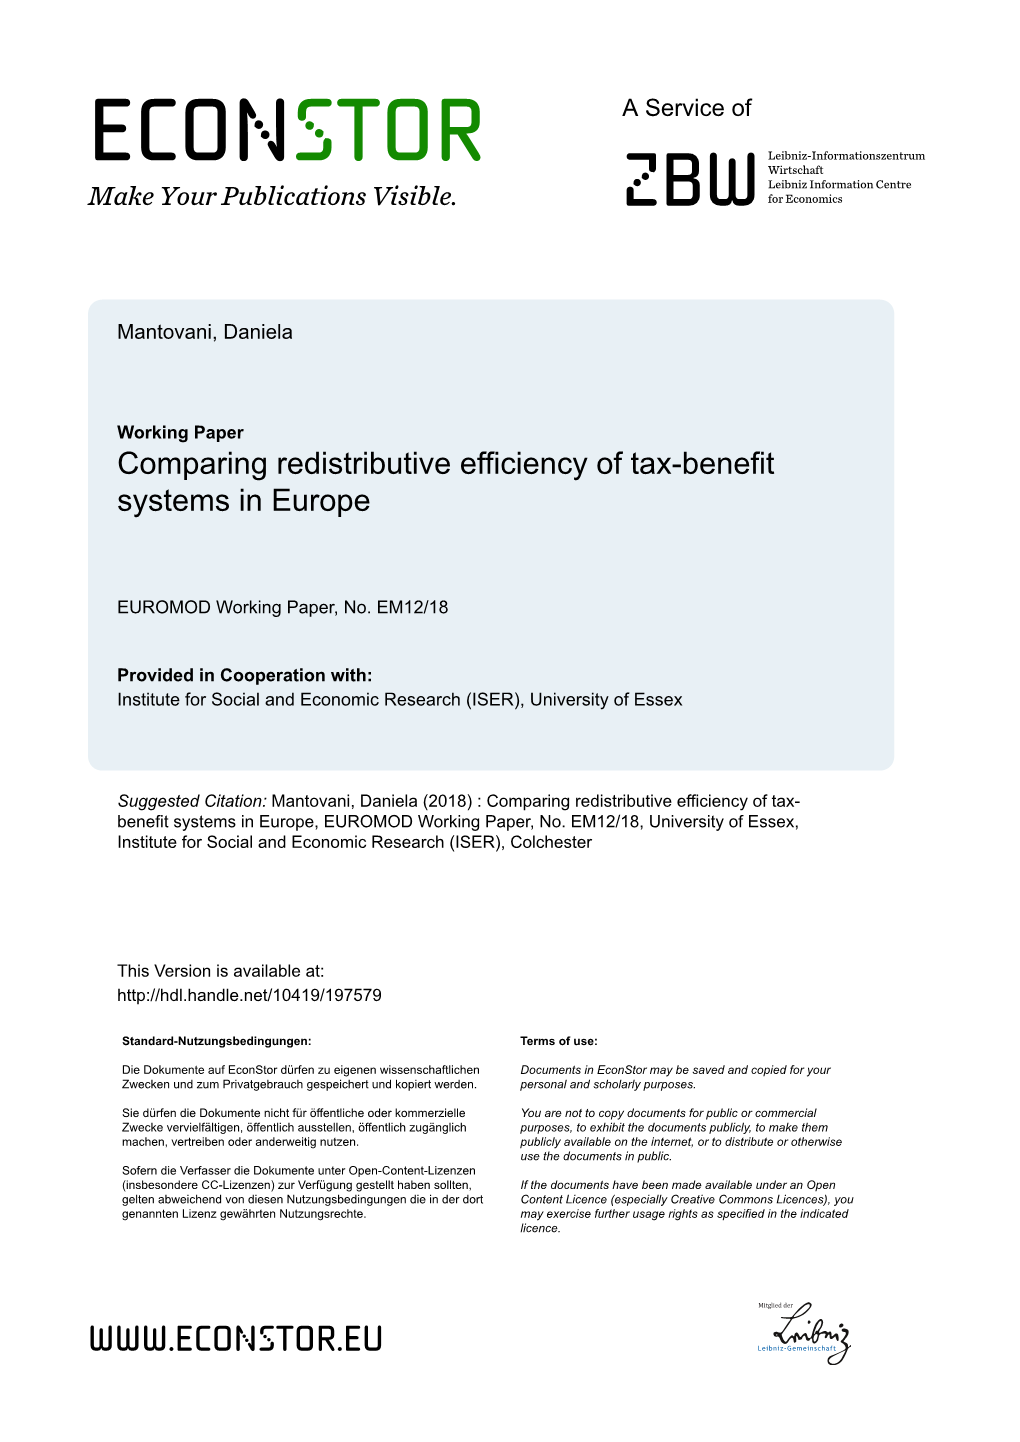 Comparing Redistributive Efficiency of Tax-Benefit Systems in Europe